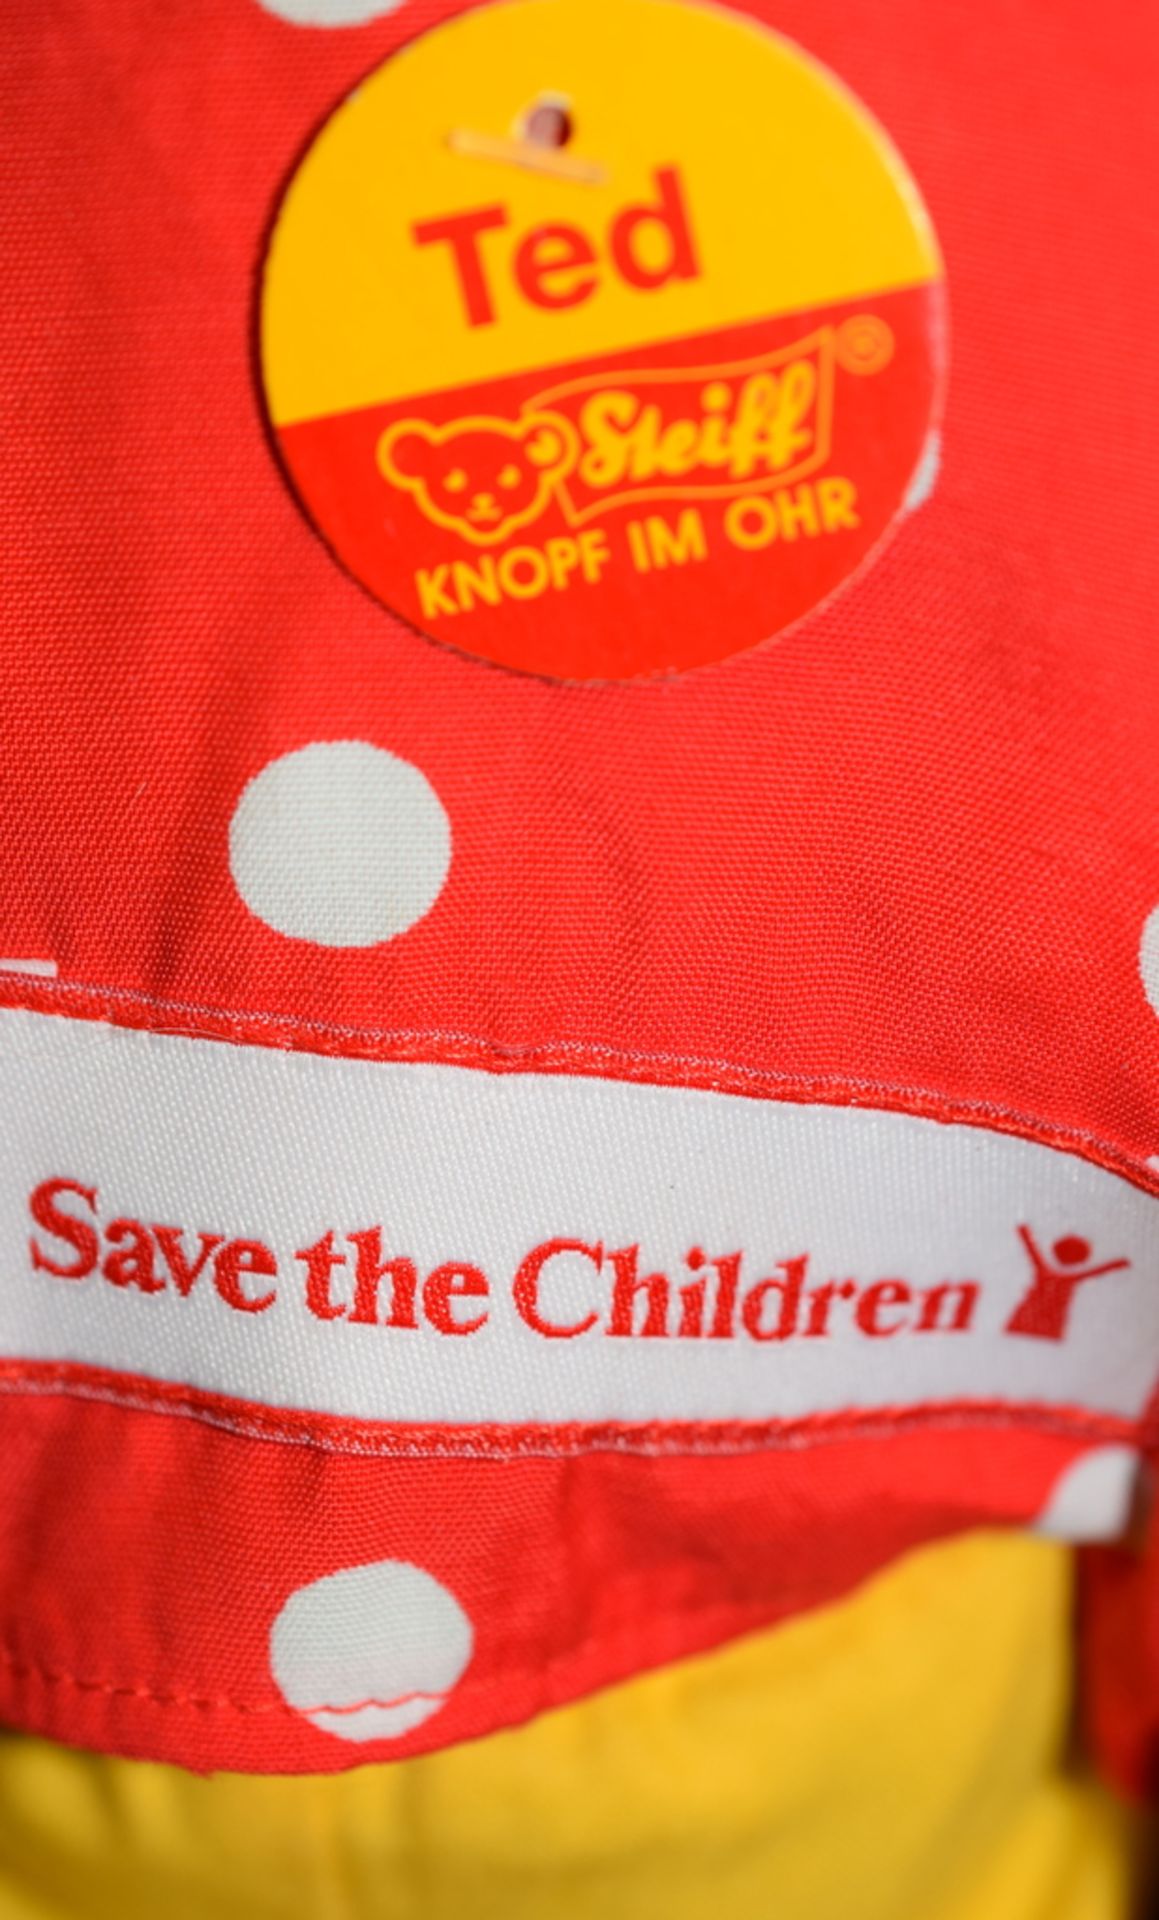 Save The Children Commemorative Bear - Image 3 of 4